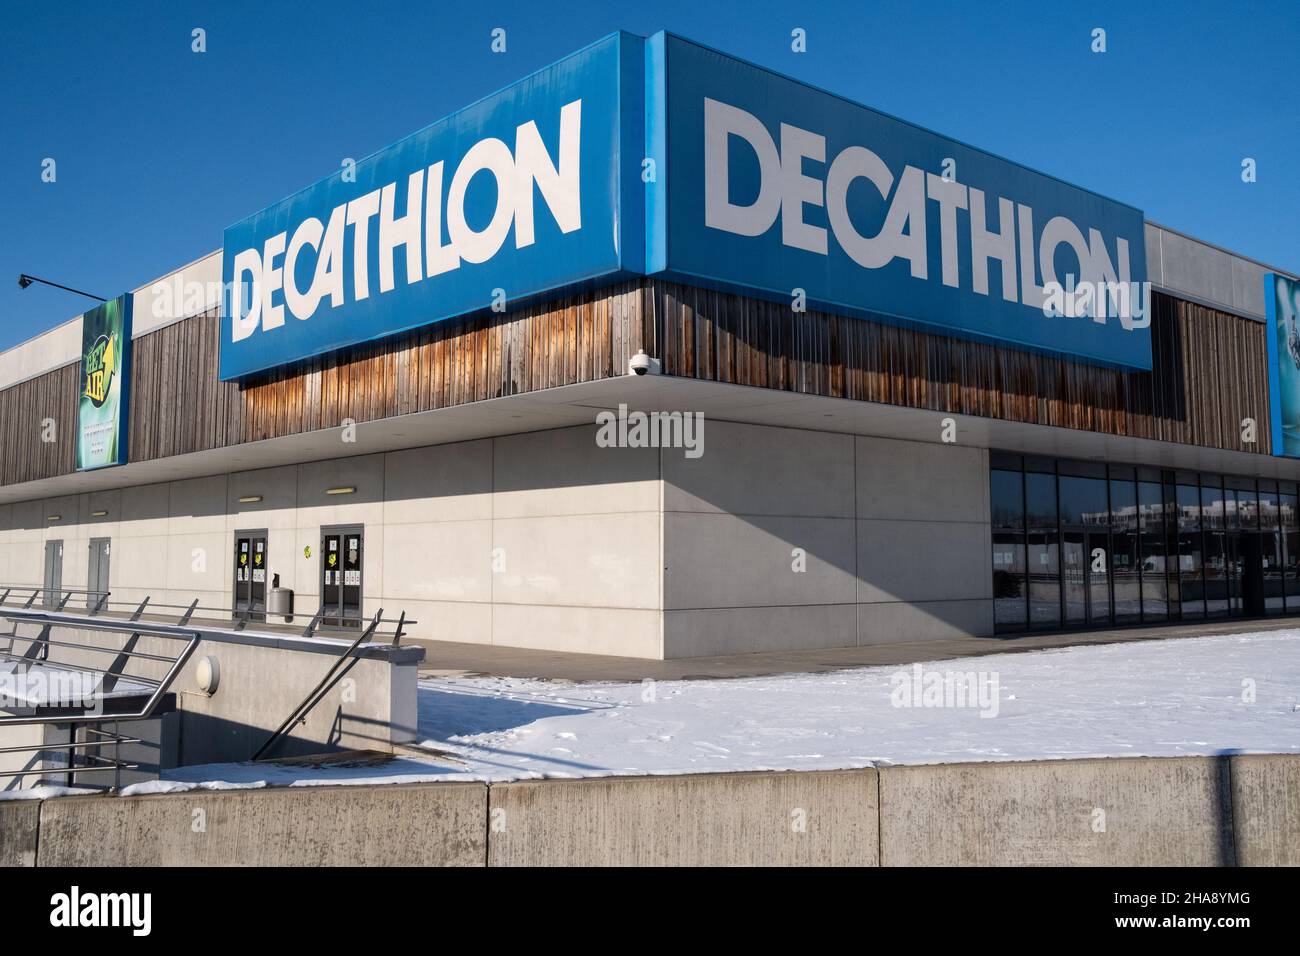 Page 3 - Europe Decathlon High Resolution Stock Photography and Images -  Alamy